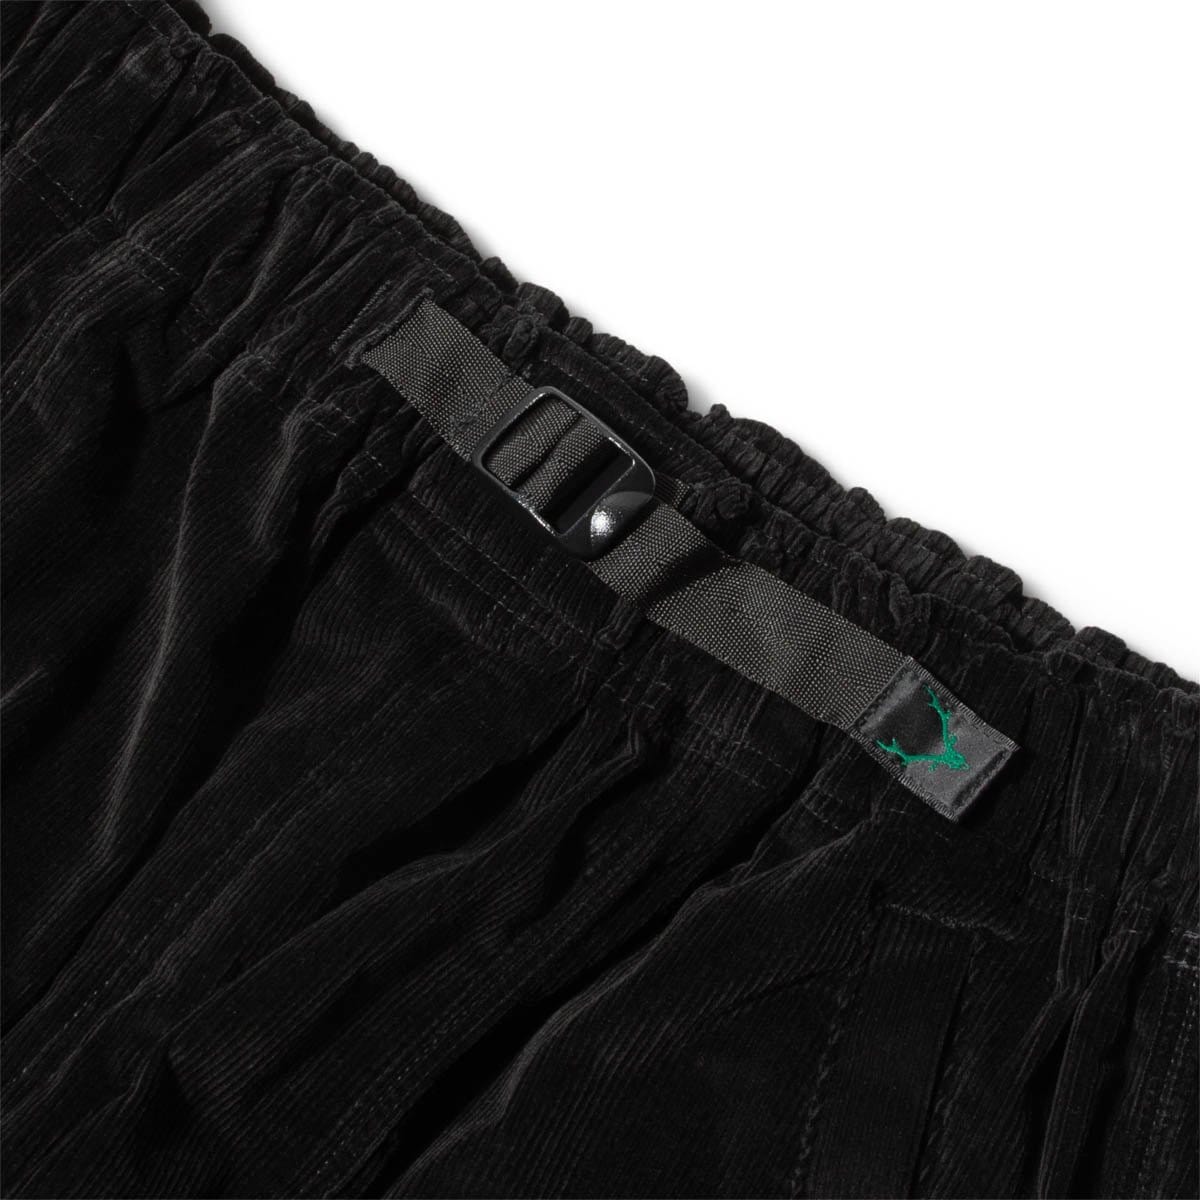 South2 West8 Bottoms BELTED CS PANT